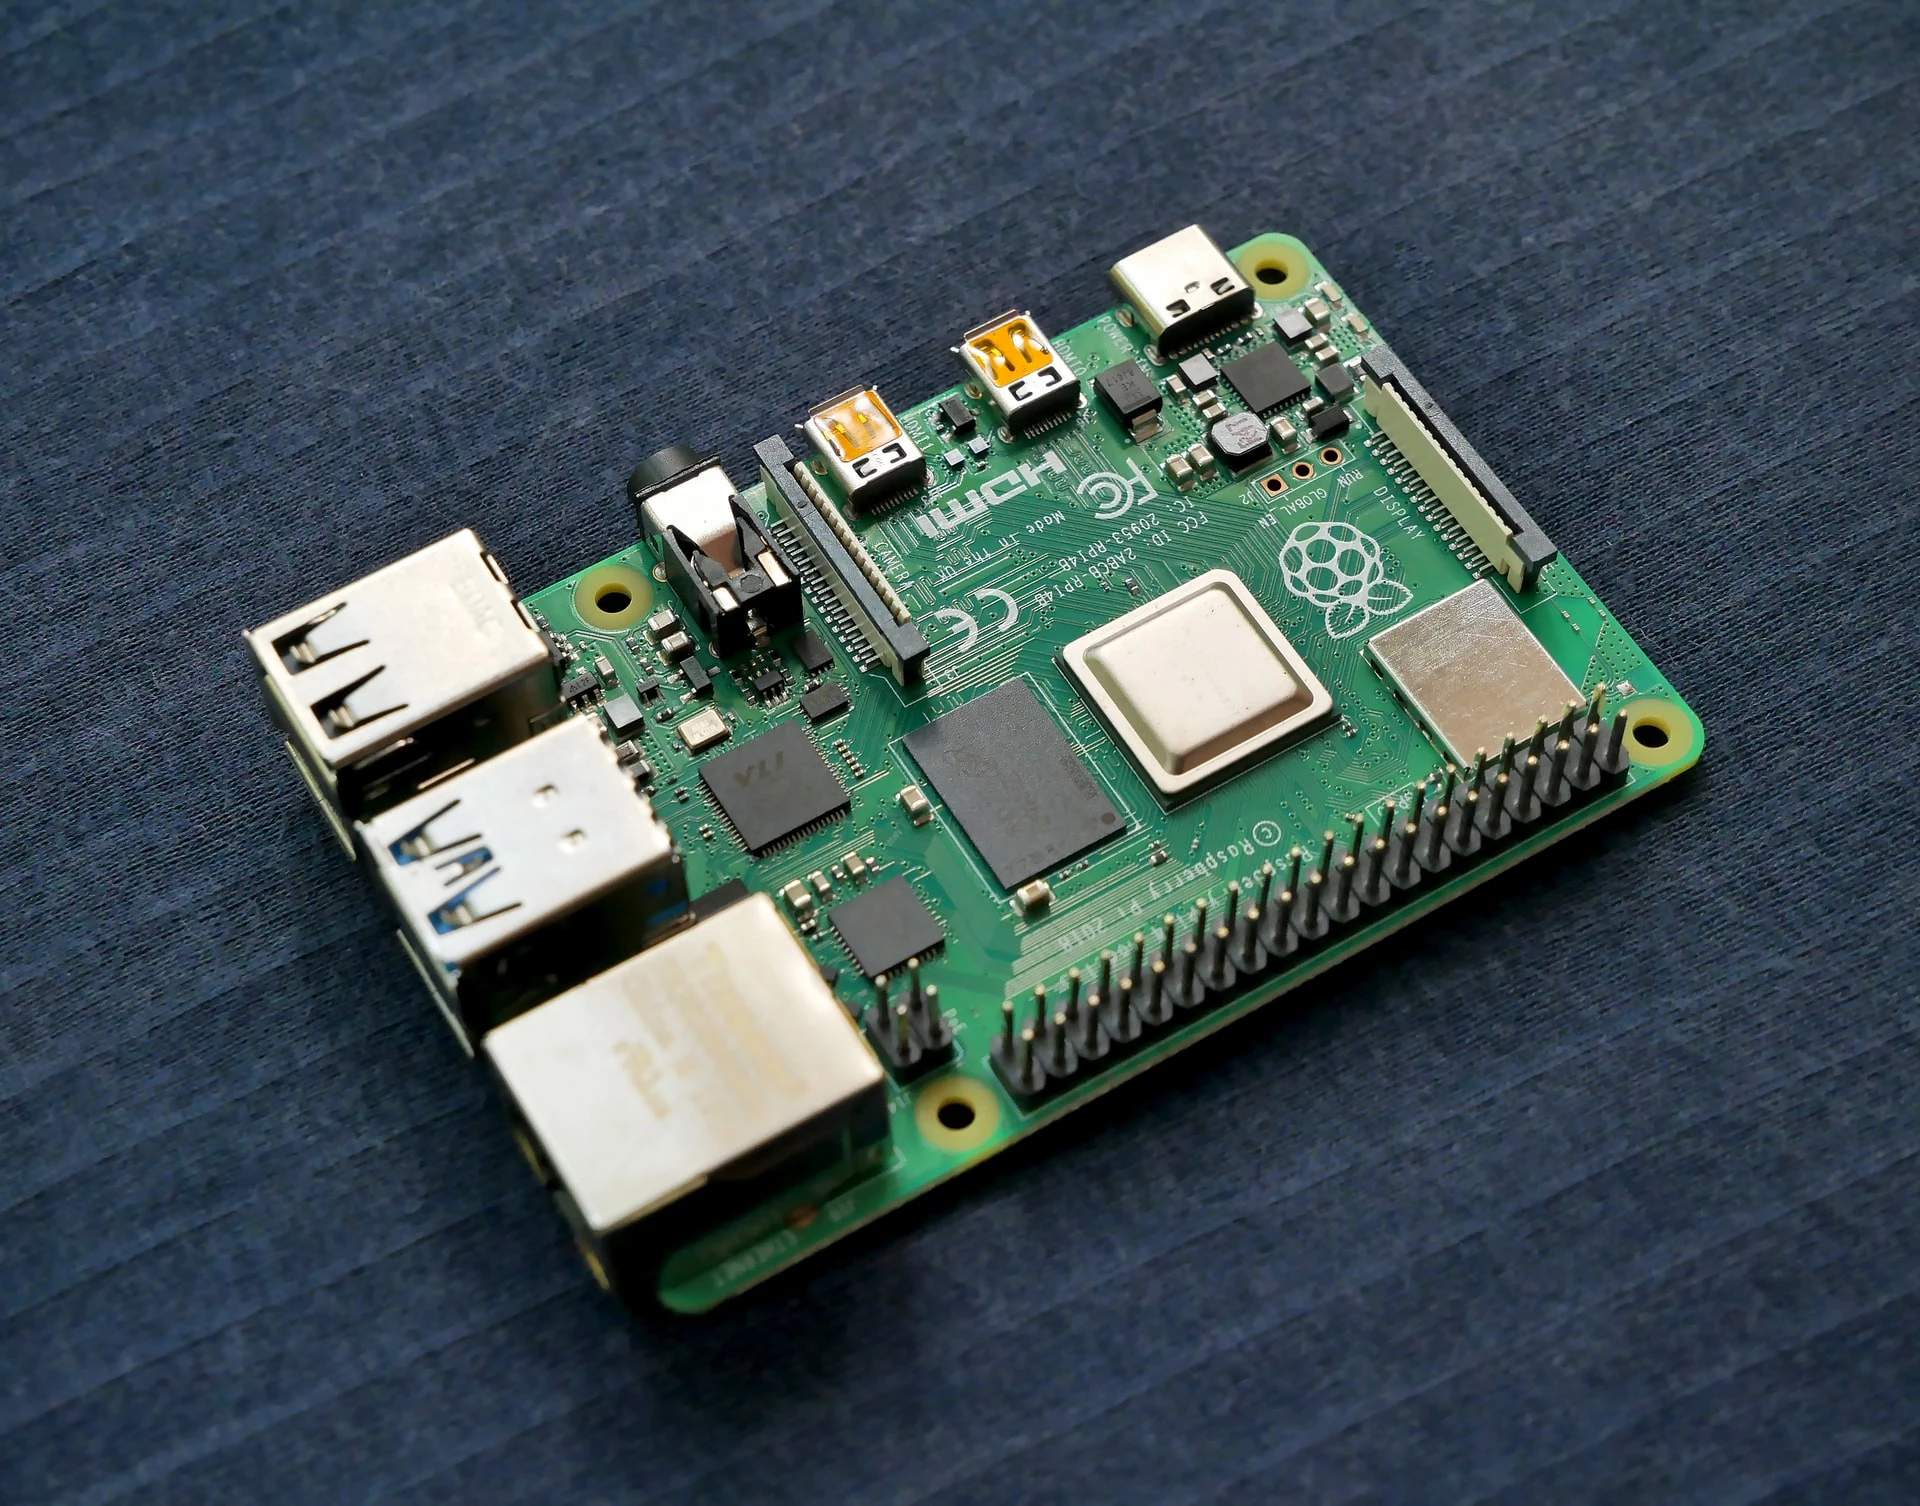 Picture of raspberry pi computer on blue cloth